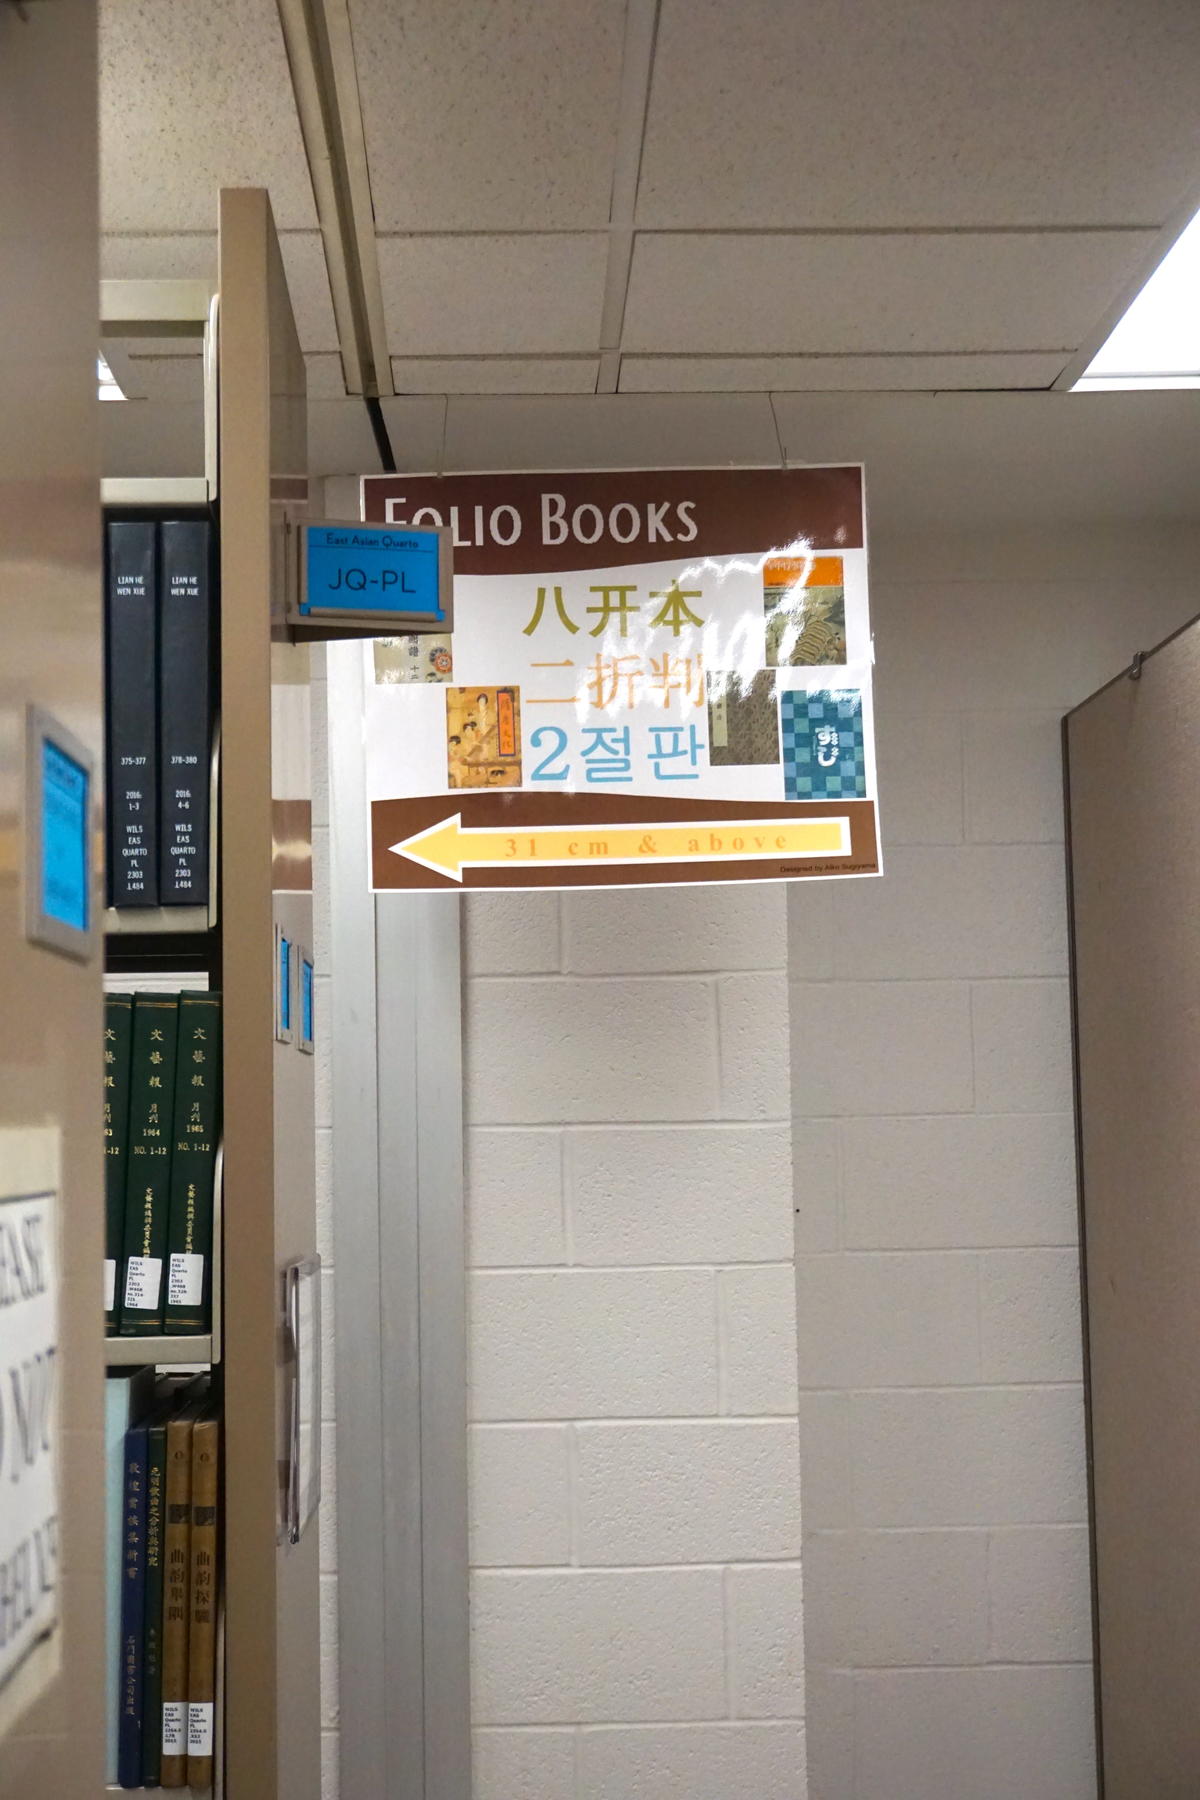 Sign shows the direction of Folio books